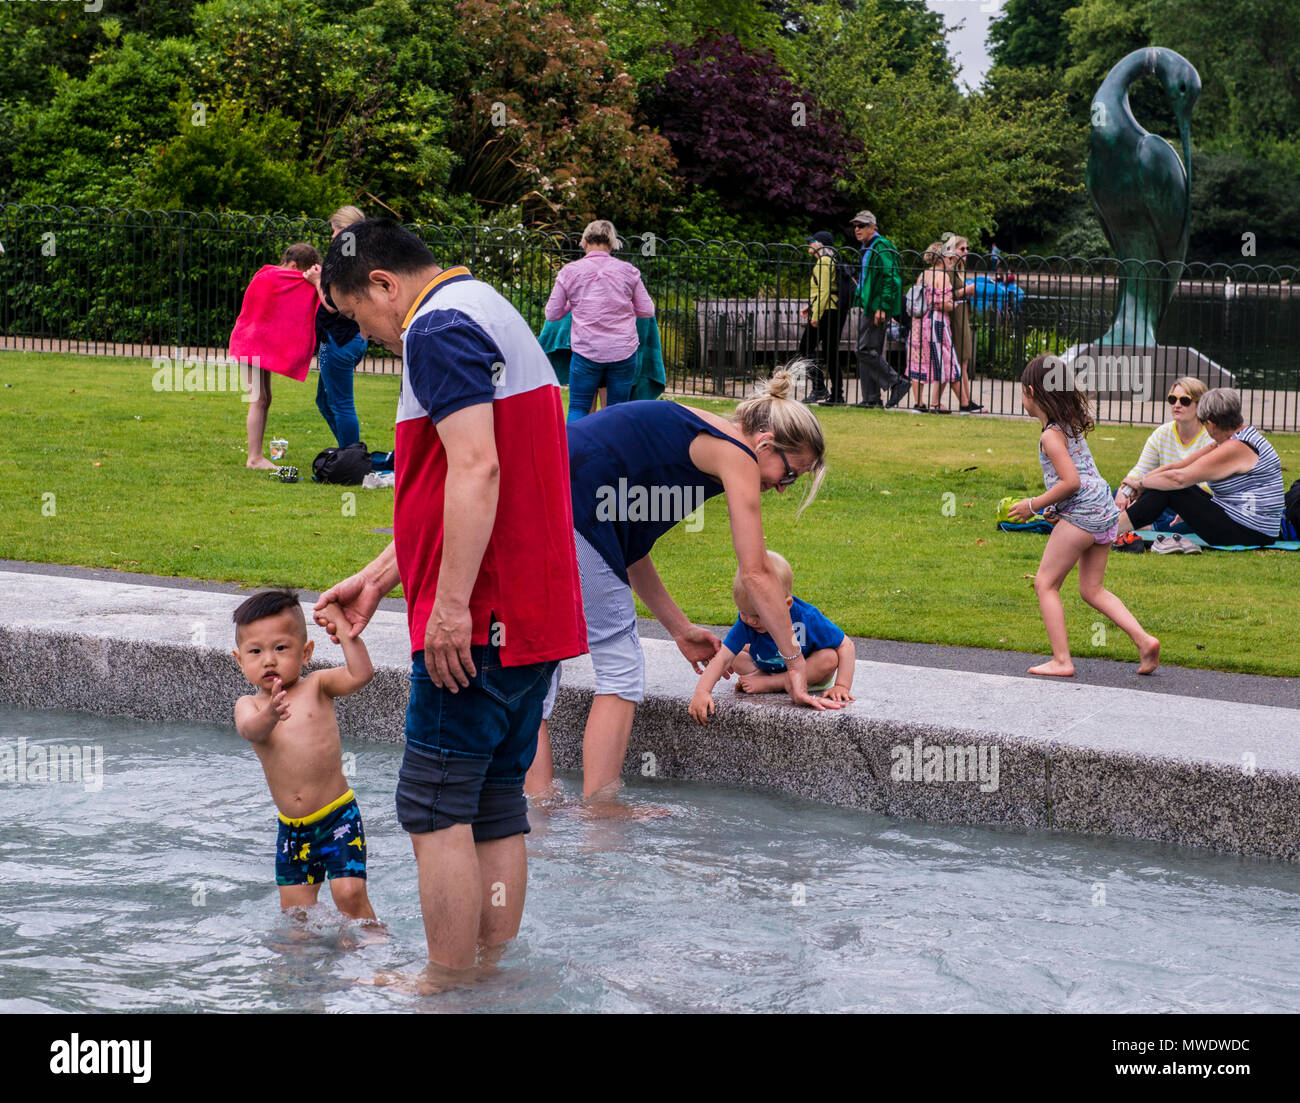 London, UK. 1st Jun, 2018. UK Weather: Cloudy day at Serpentine lake, Hyde Park.  A small boy points at the camera while playing in the water with his dad at the Princess Diana Memorial in Hyde Park. Credit: Ernesto Rogata/Alamy Live News. Stock Photo